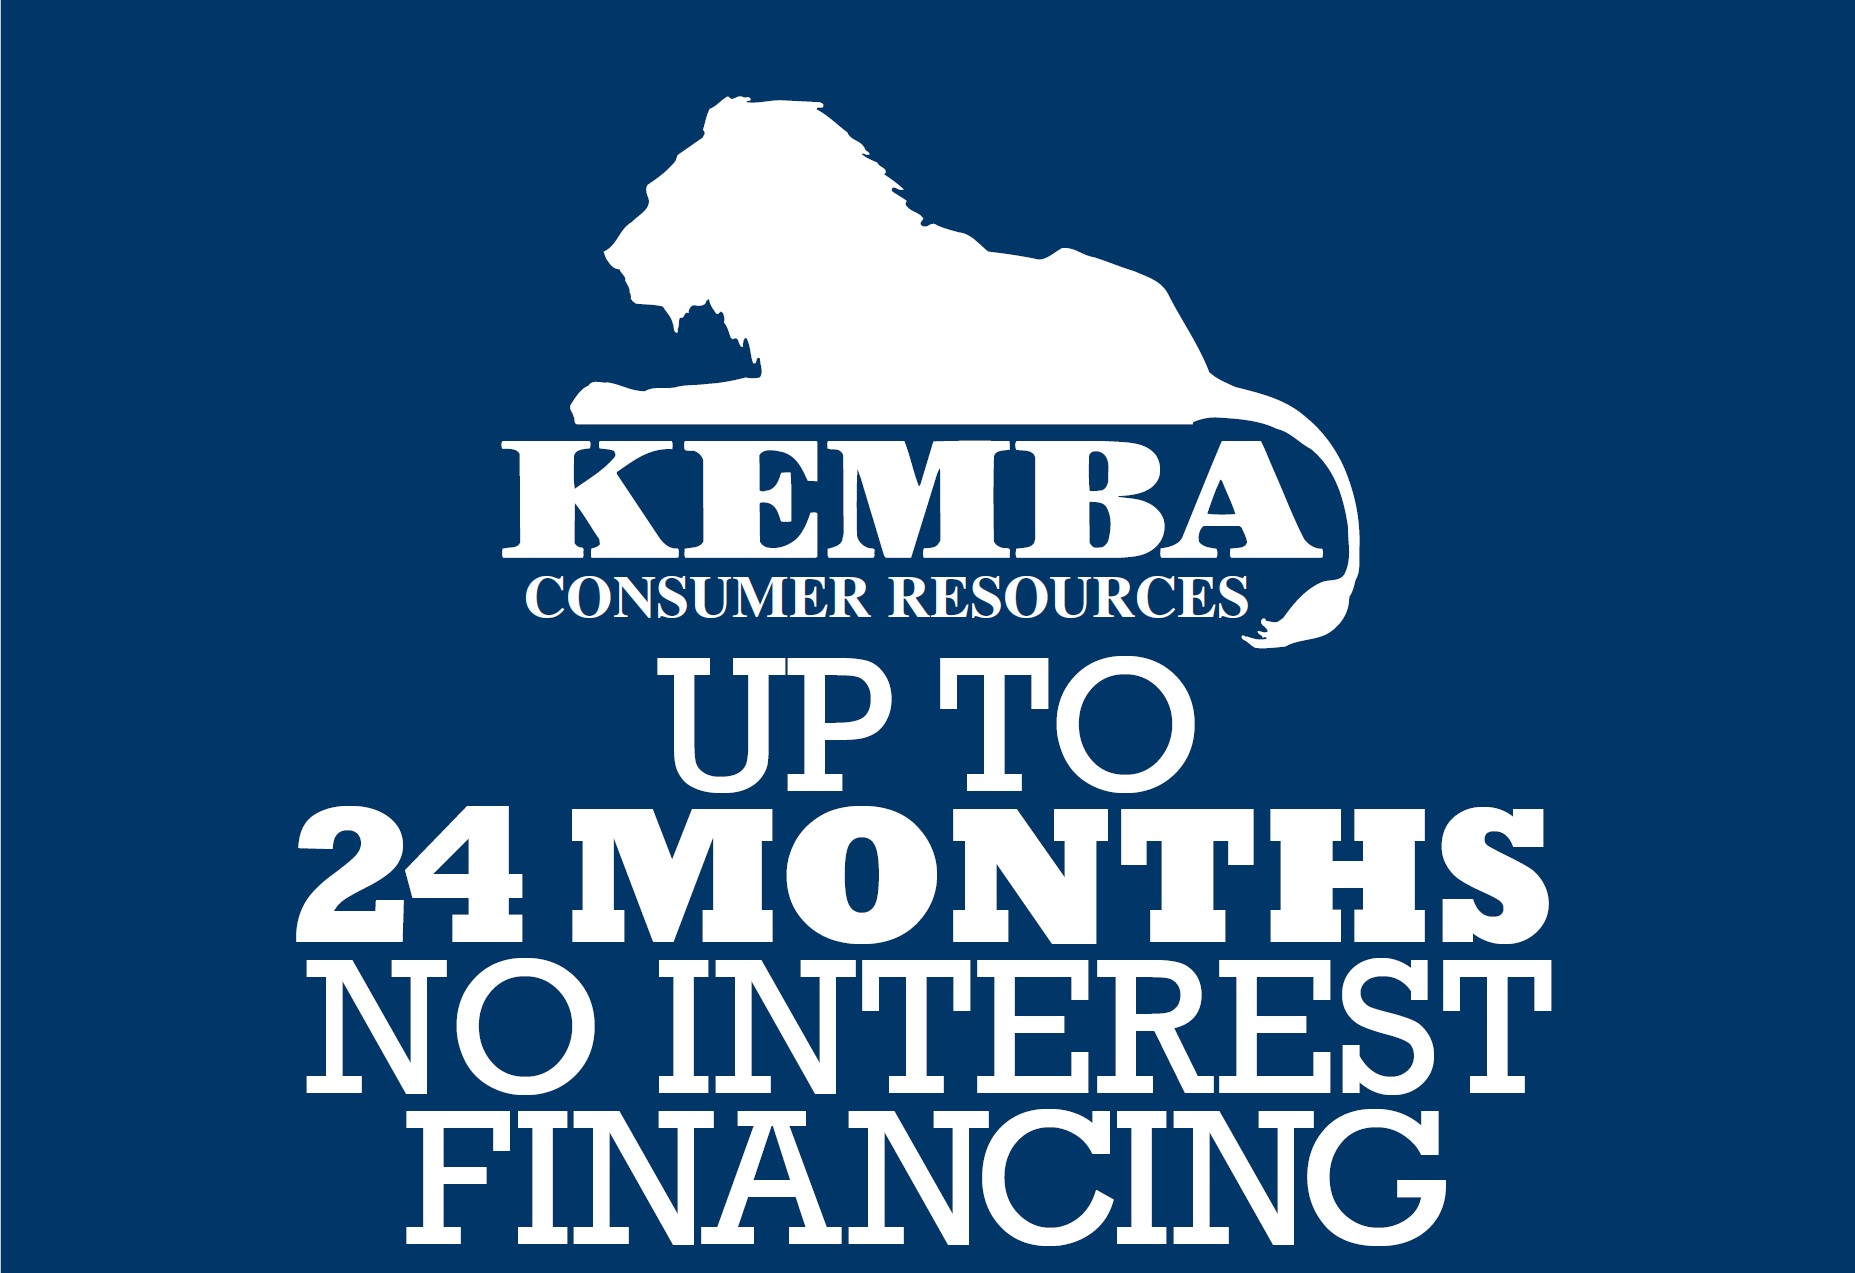 Kemba 0% Financing UP TO 24 MONTHS NO INTEREST FINANCING